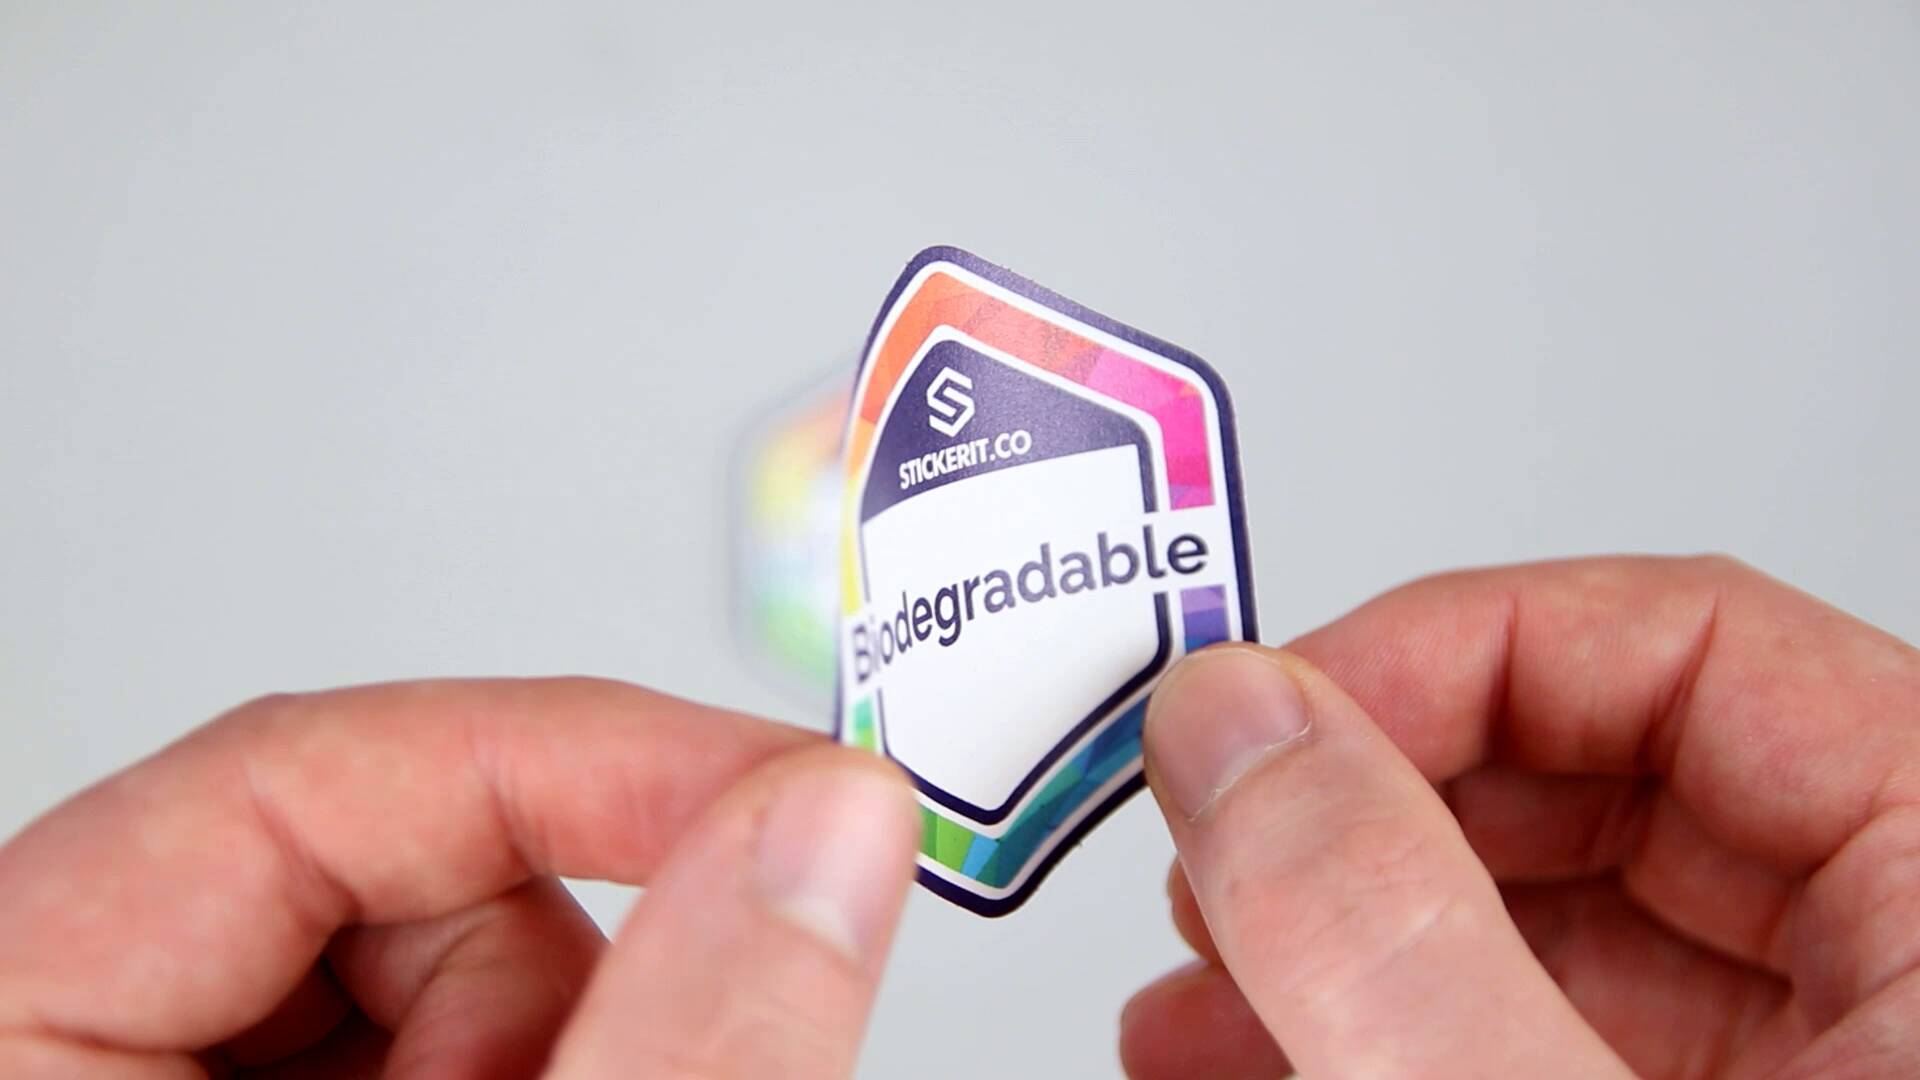 A short video showing what biodegradable paper stickers are